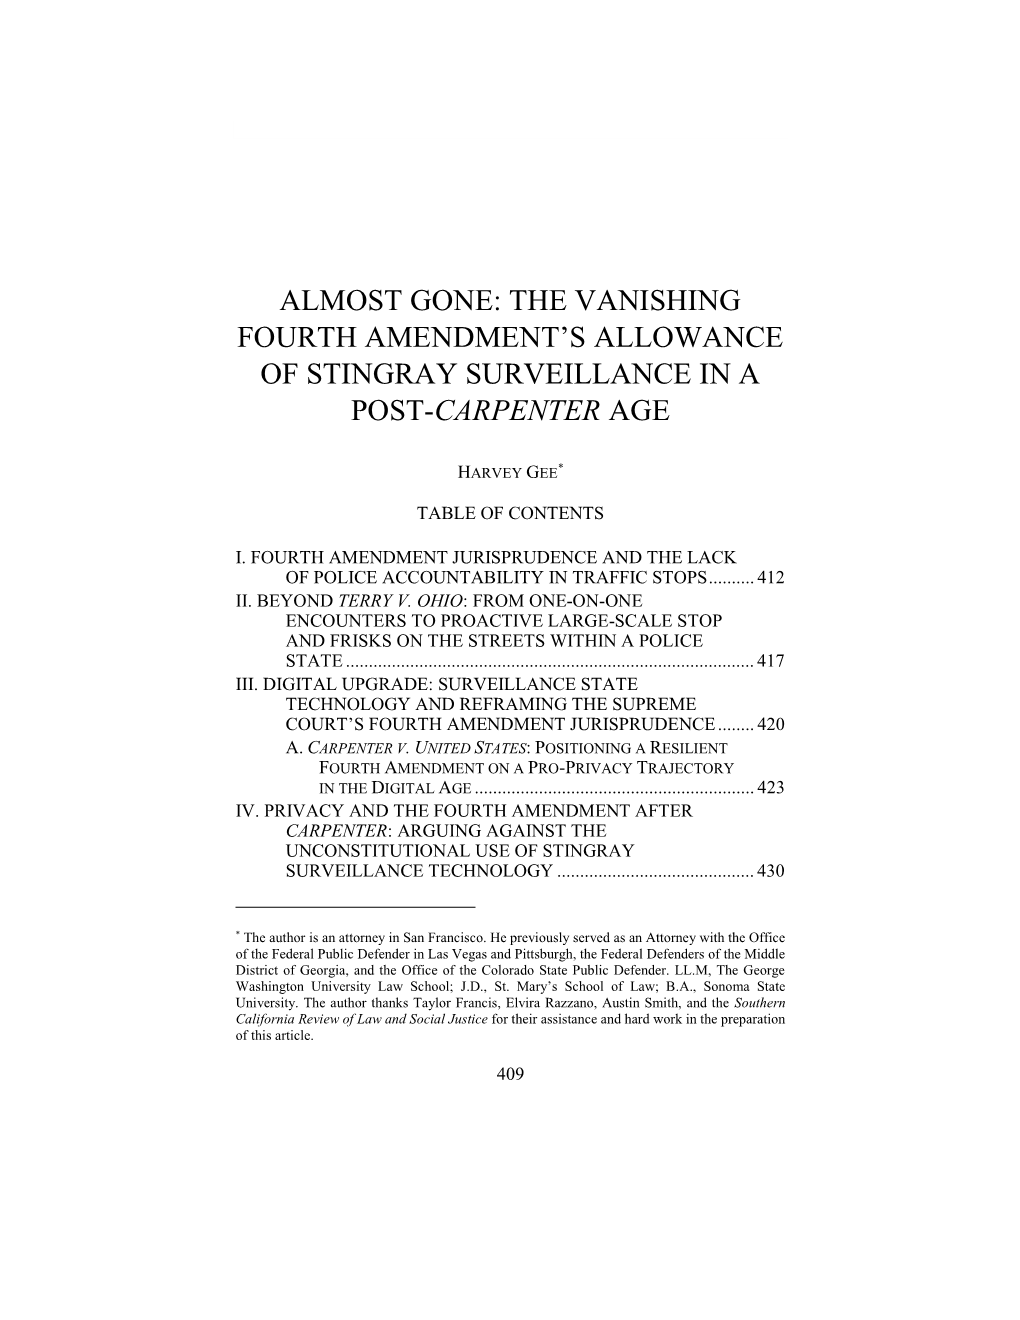 Almost Gone: the Vanishing Fourth Amendment's Allowance Of